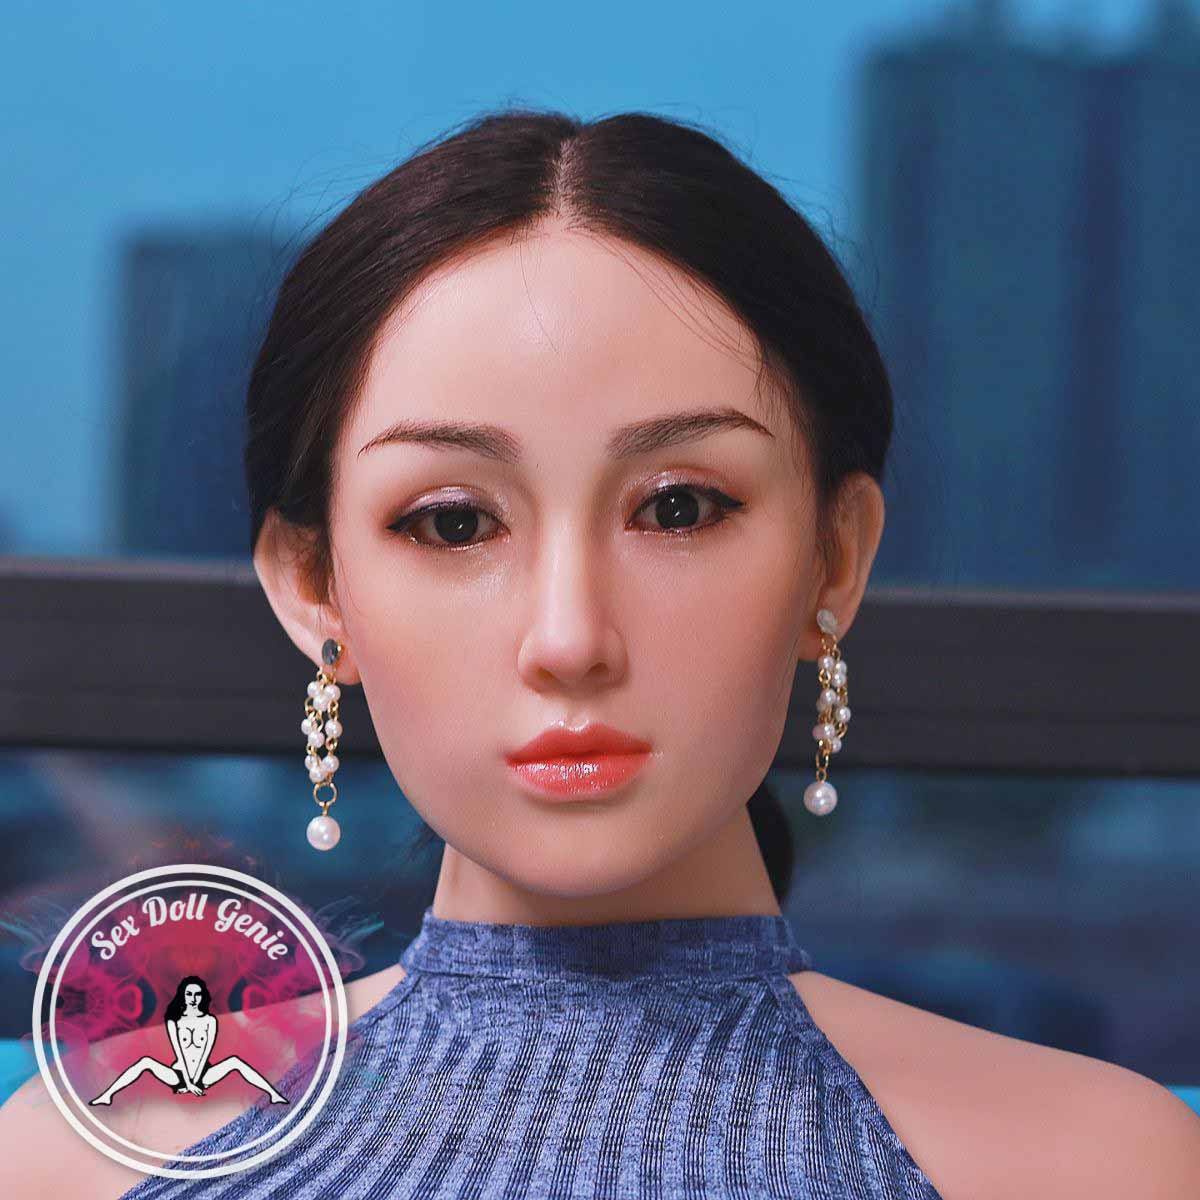 Verdell - 159cm  M Cup (Hybrid Silicone Head + TPE Body) incl. Implanted Hair TPE Doll-17